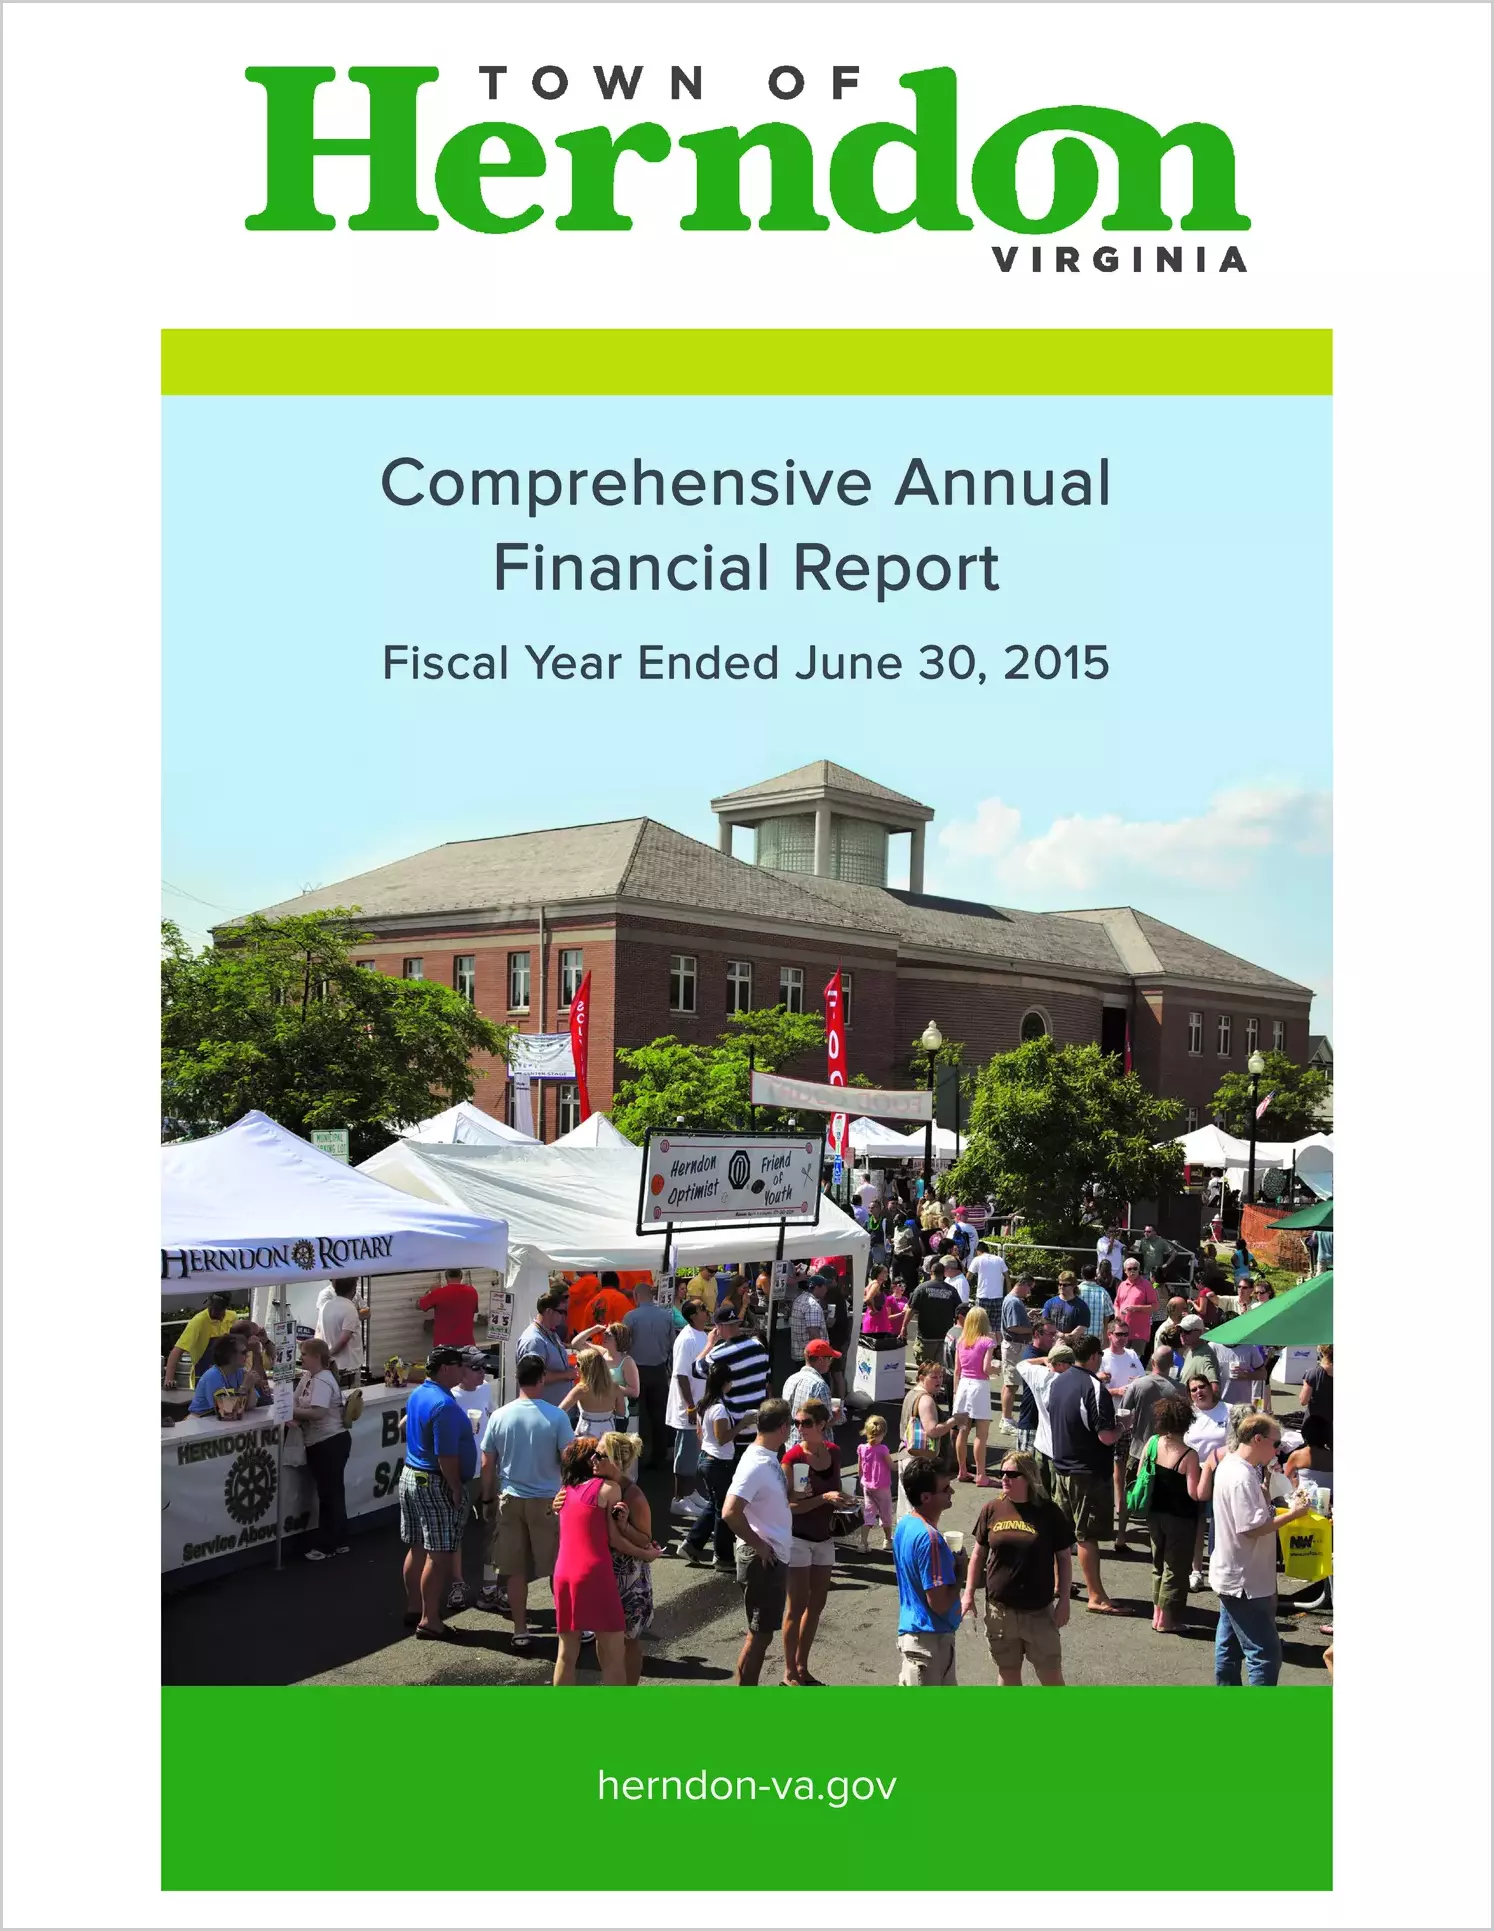 2015 Annual Financial Report for Town of Herndon